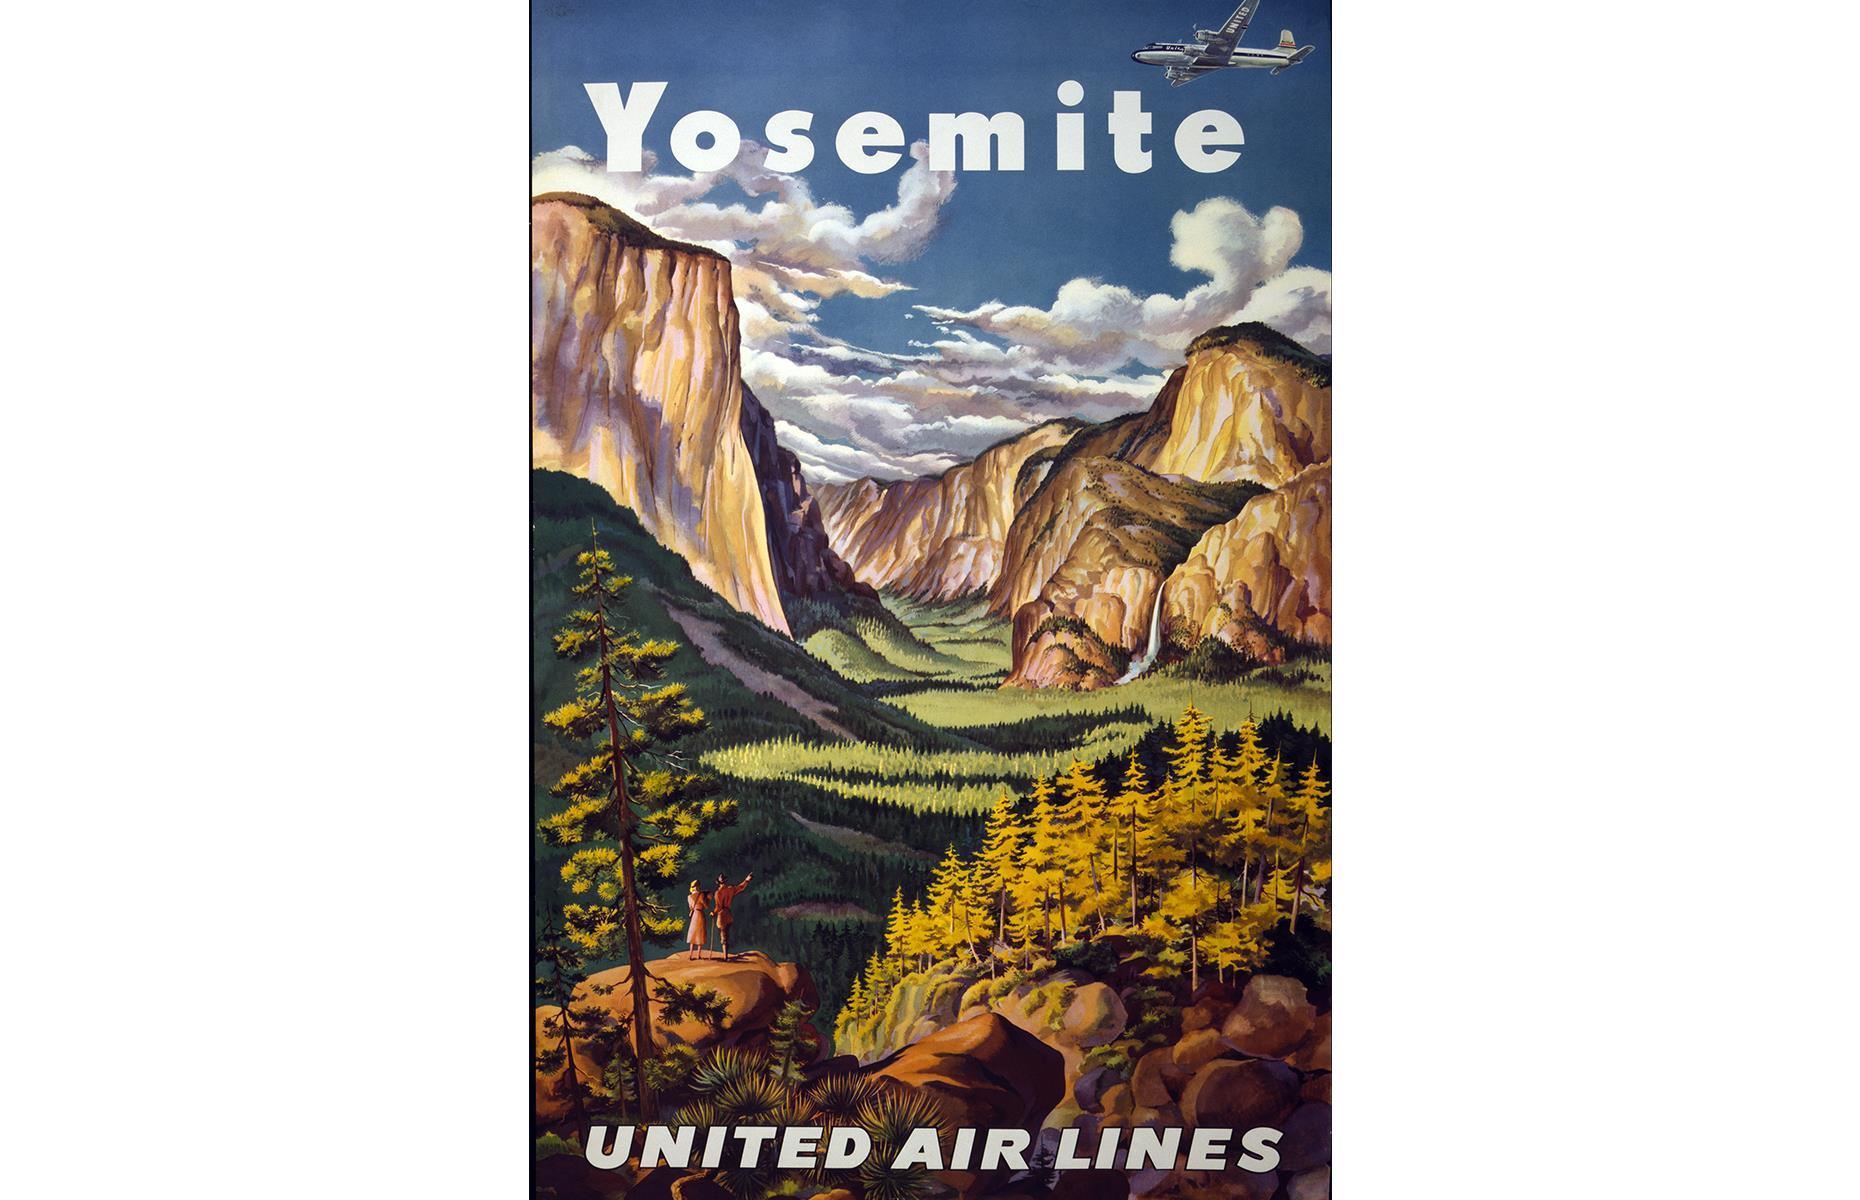 United Airlines remains one of America's top carriers – and this vintage ad from the airline shows off one of the country's finest national parks too. The peaks rise up beneath rolling clouds as hikers gaze over the Yosemite Valley. A United Airlines plane glides above the scene.